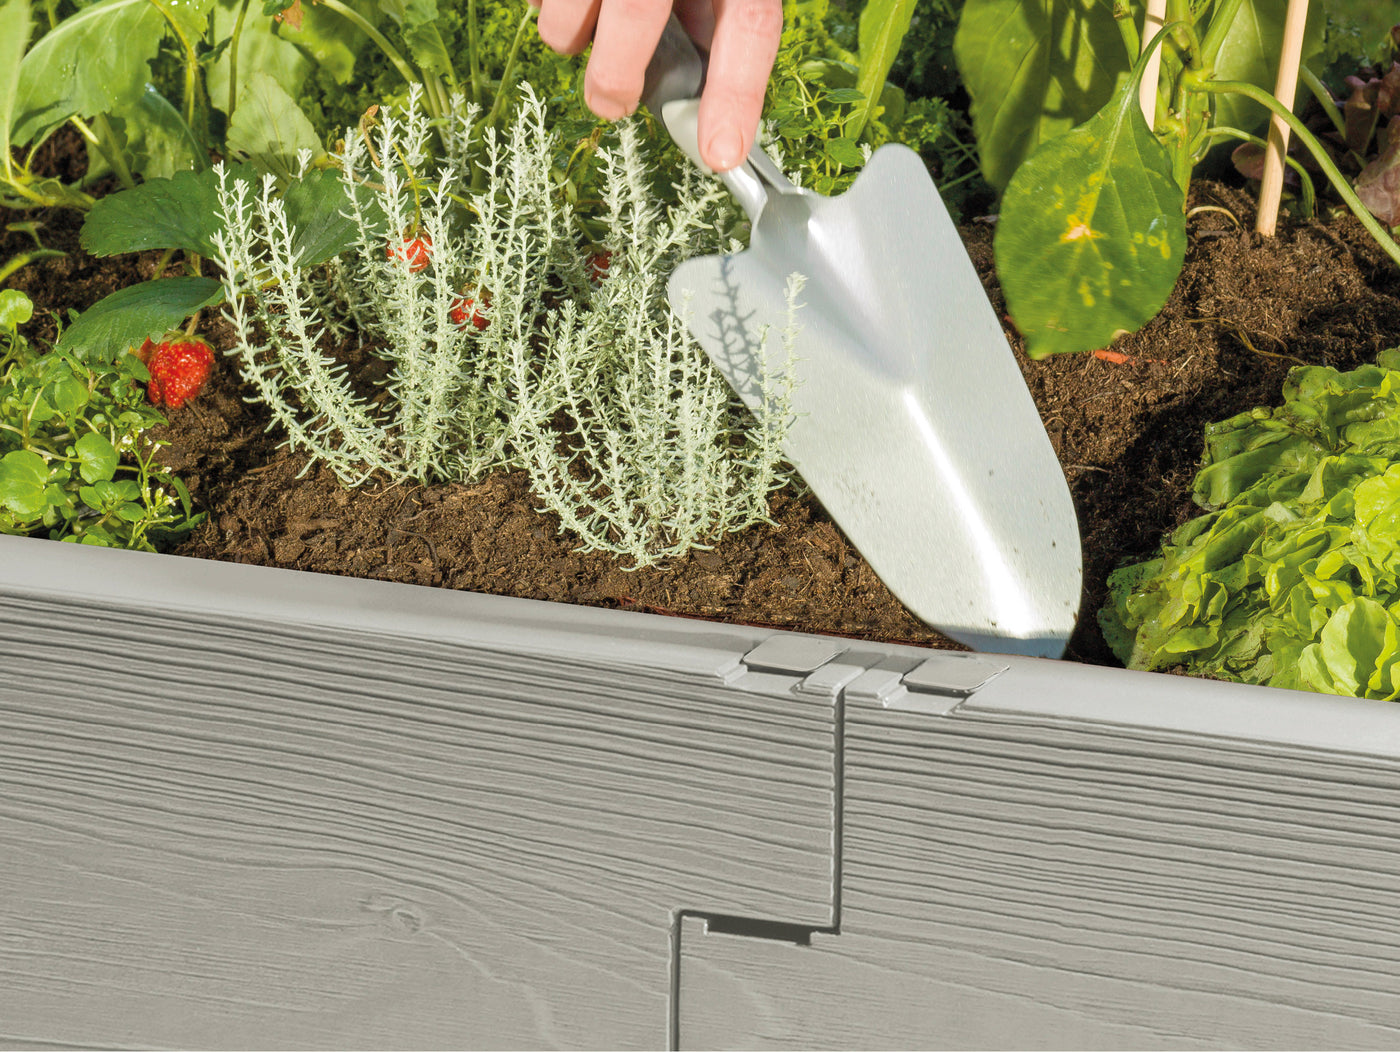 NEW! Combi Dual Function Raised Bed and Cold Frame - Made in Austria